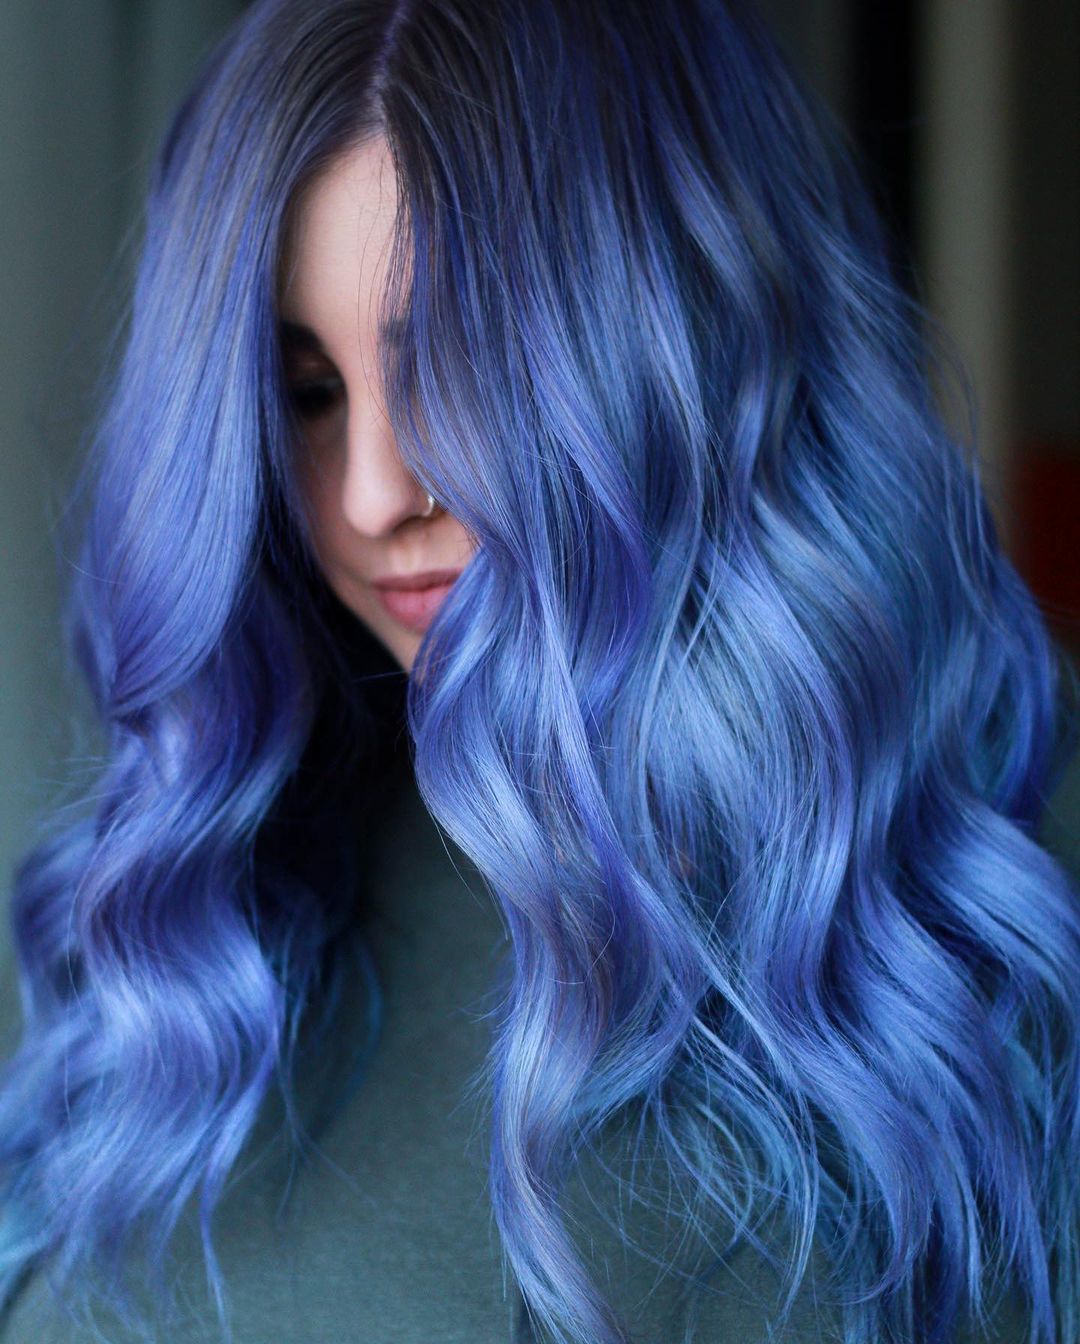 Blue hair: 40 ideas that will emphasize individuality and sense of style